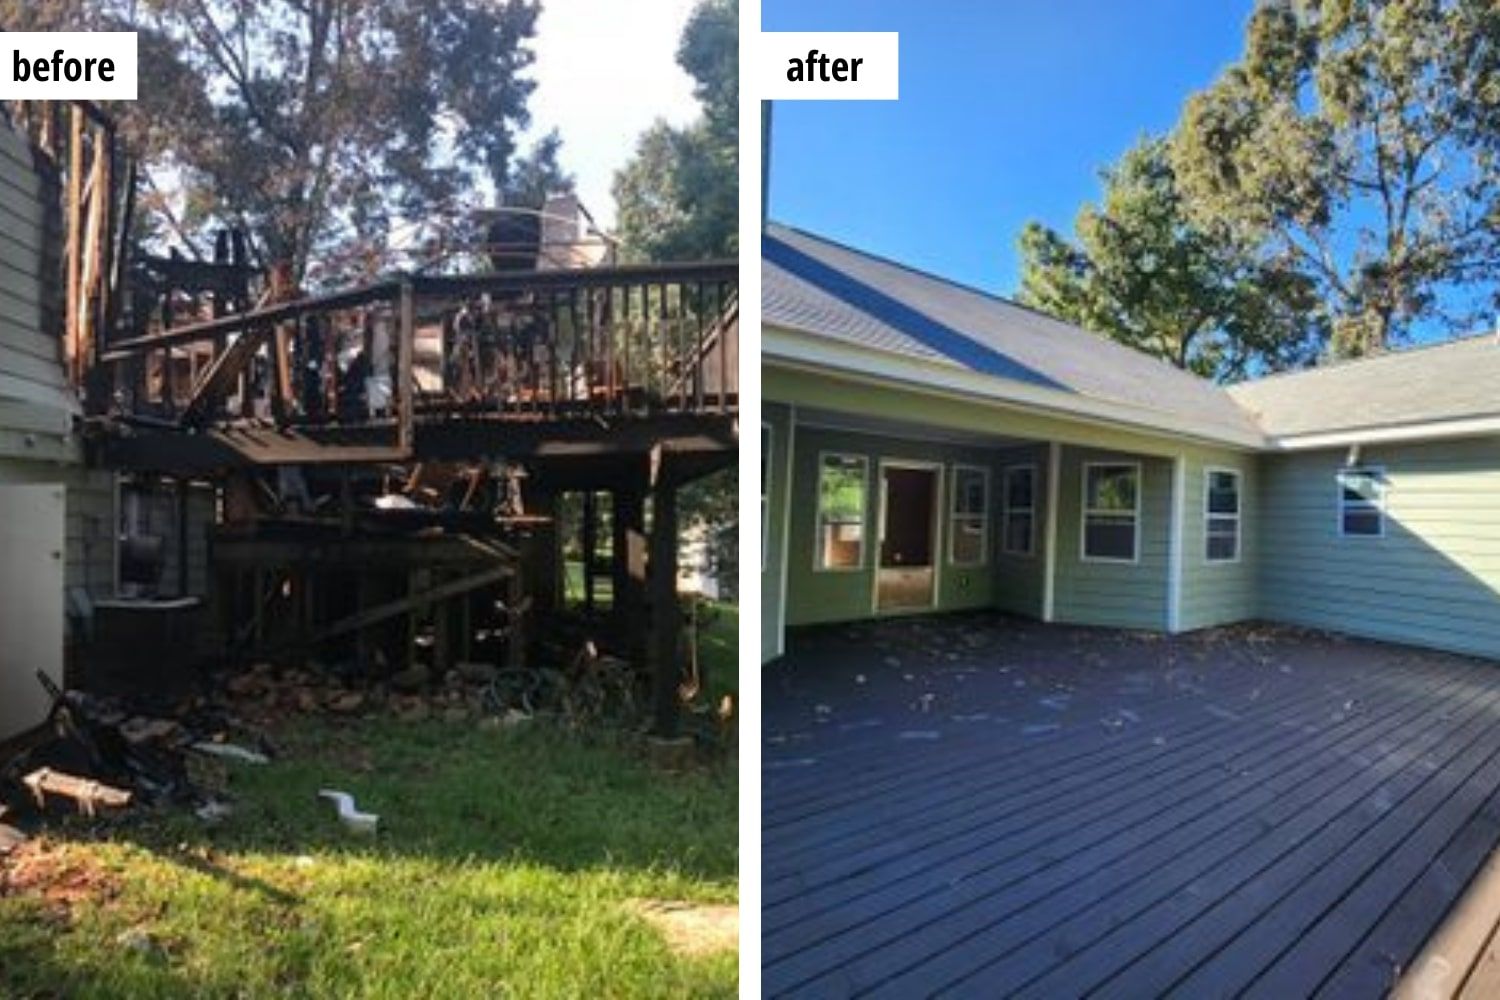 before and after comparison of a fire damaged home